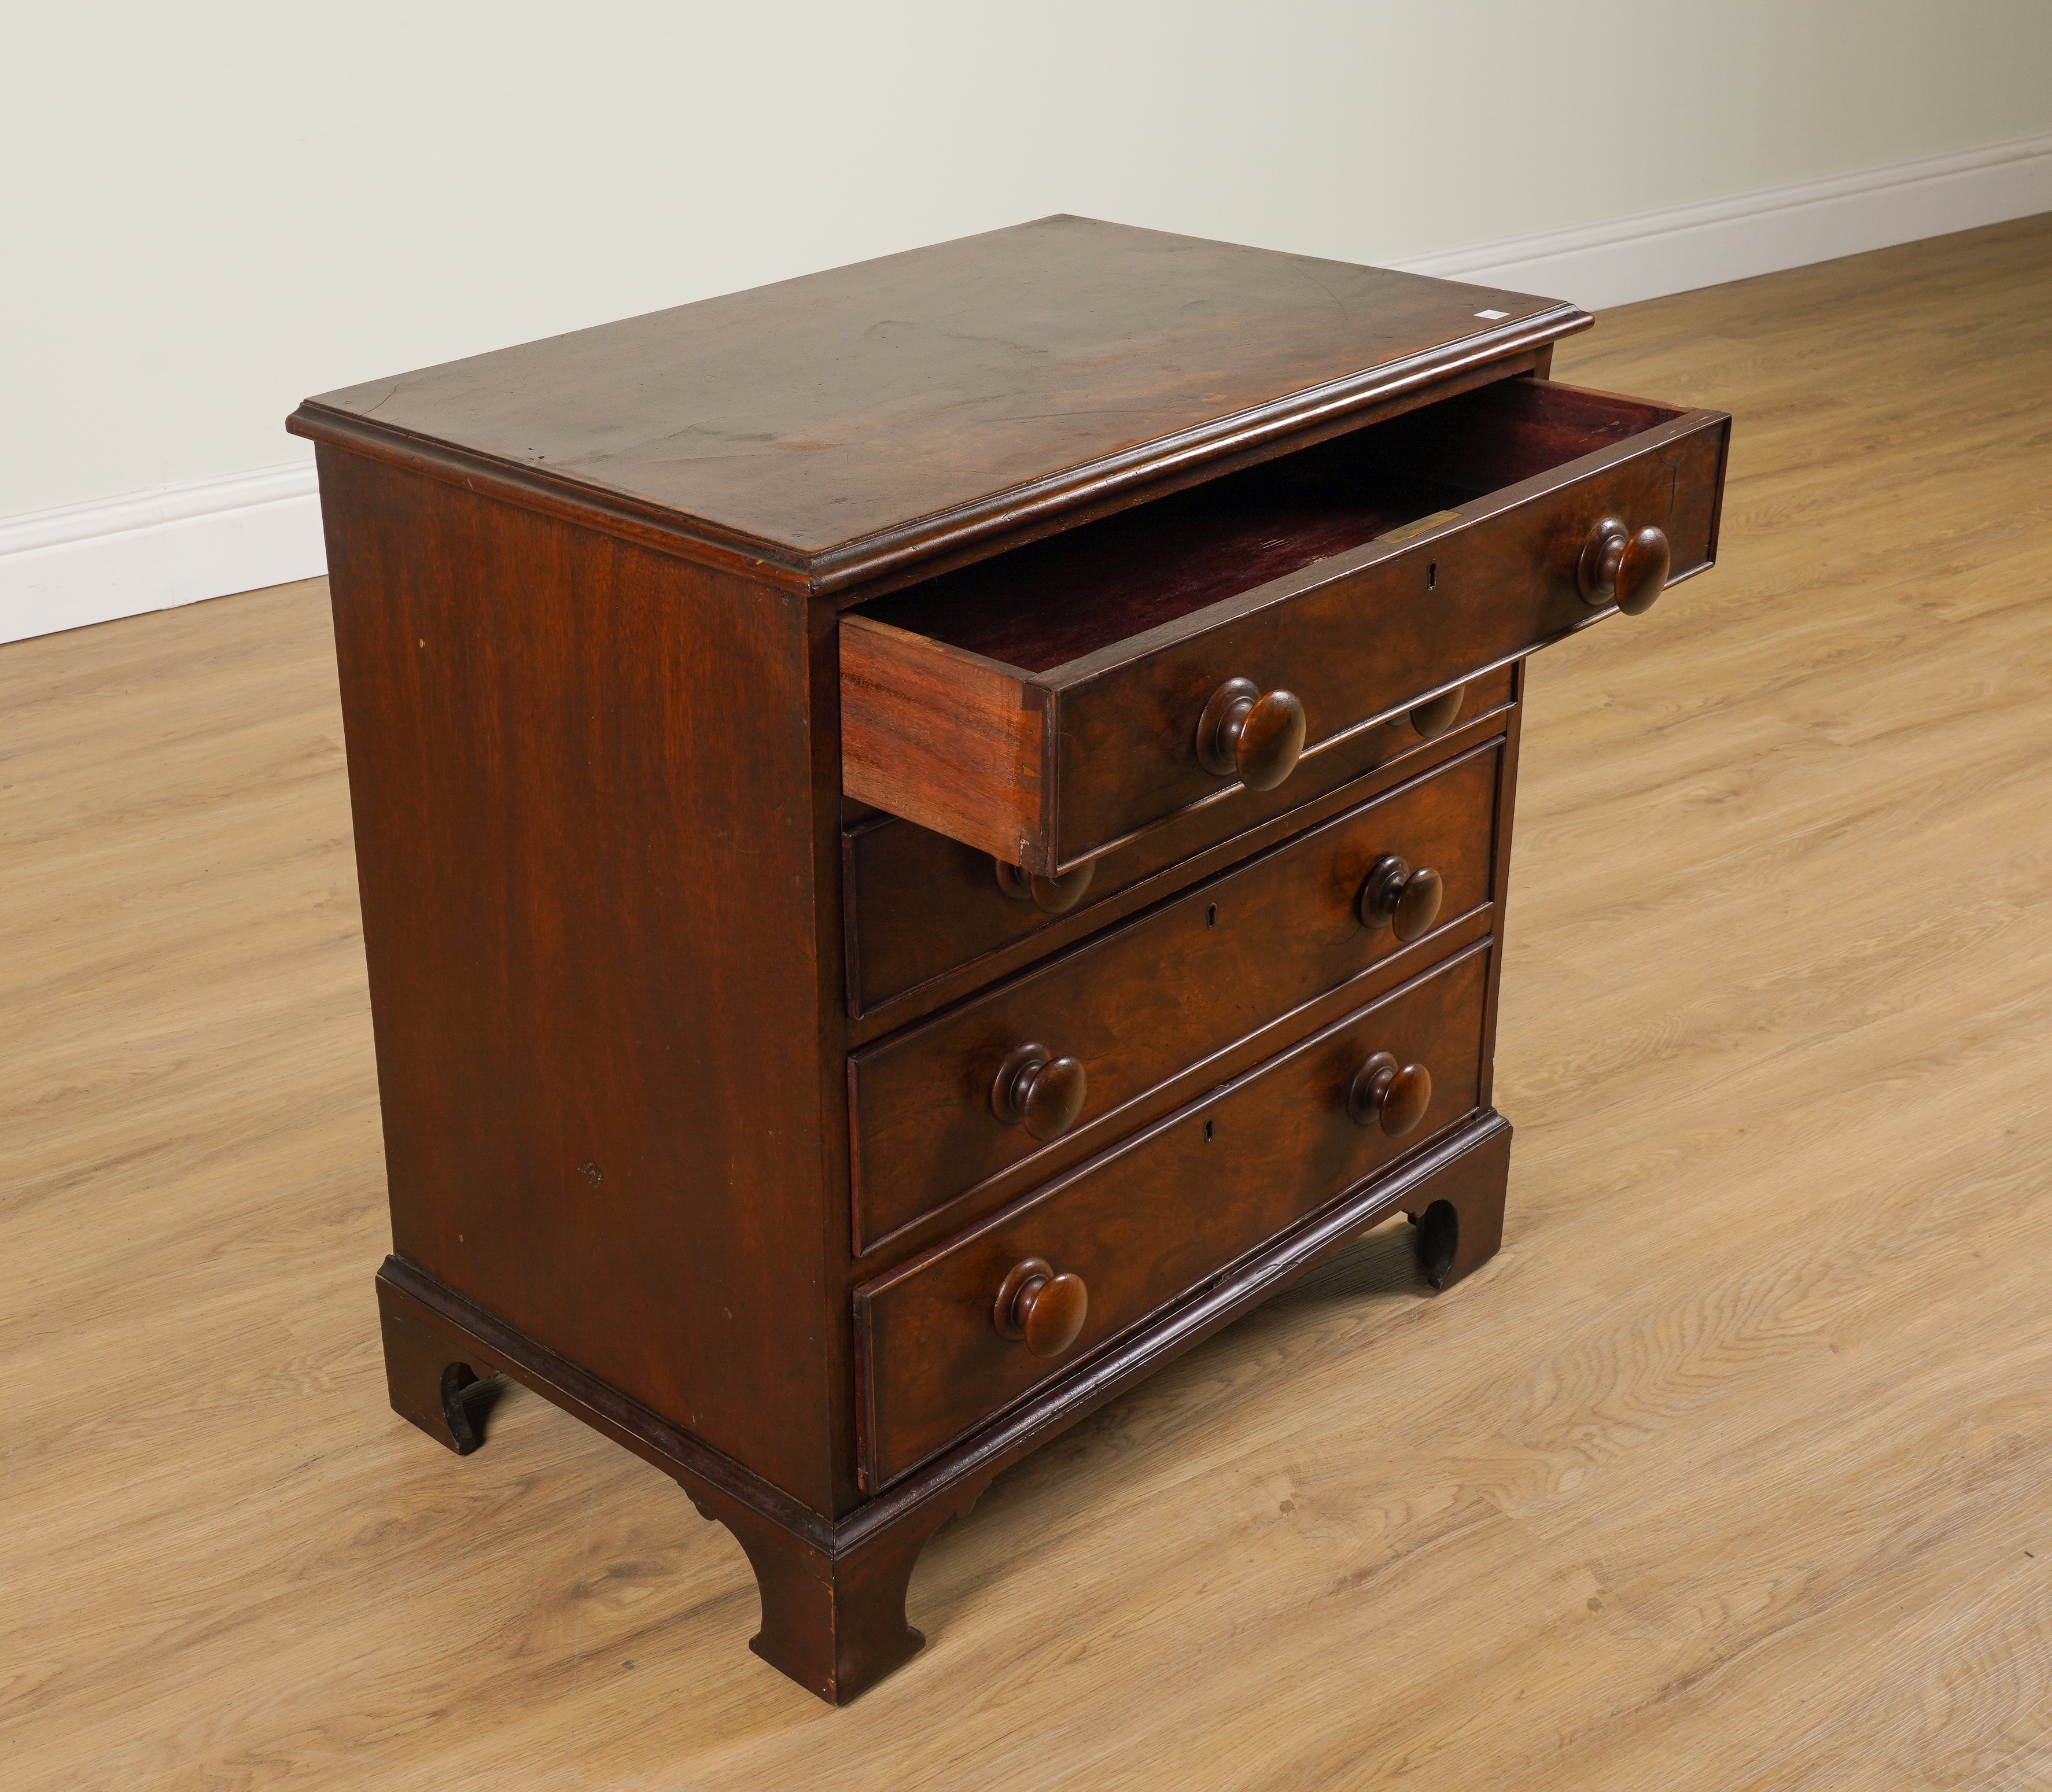 AN EARLY 19TH CENTURY MAHOGANY SMALL FOUR DRAWER CHEST - Image 6 of 7